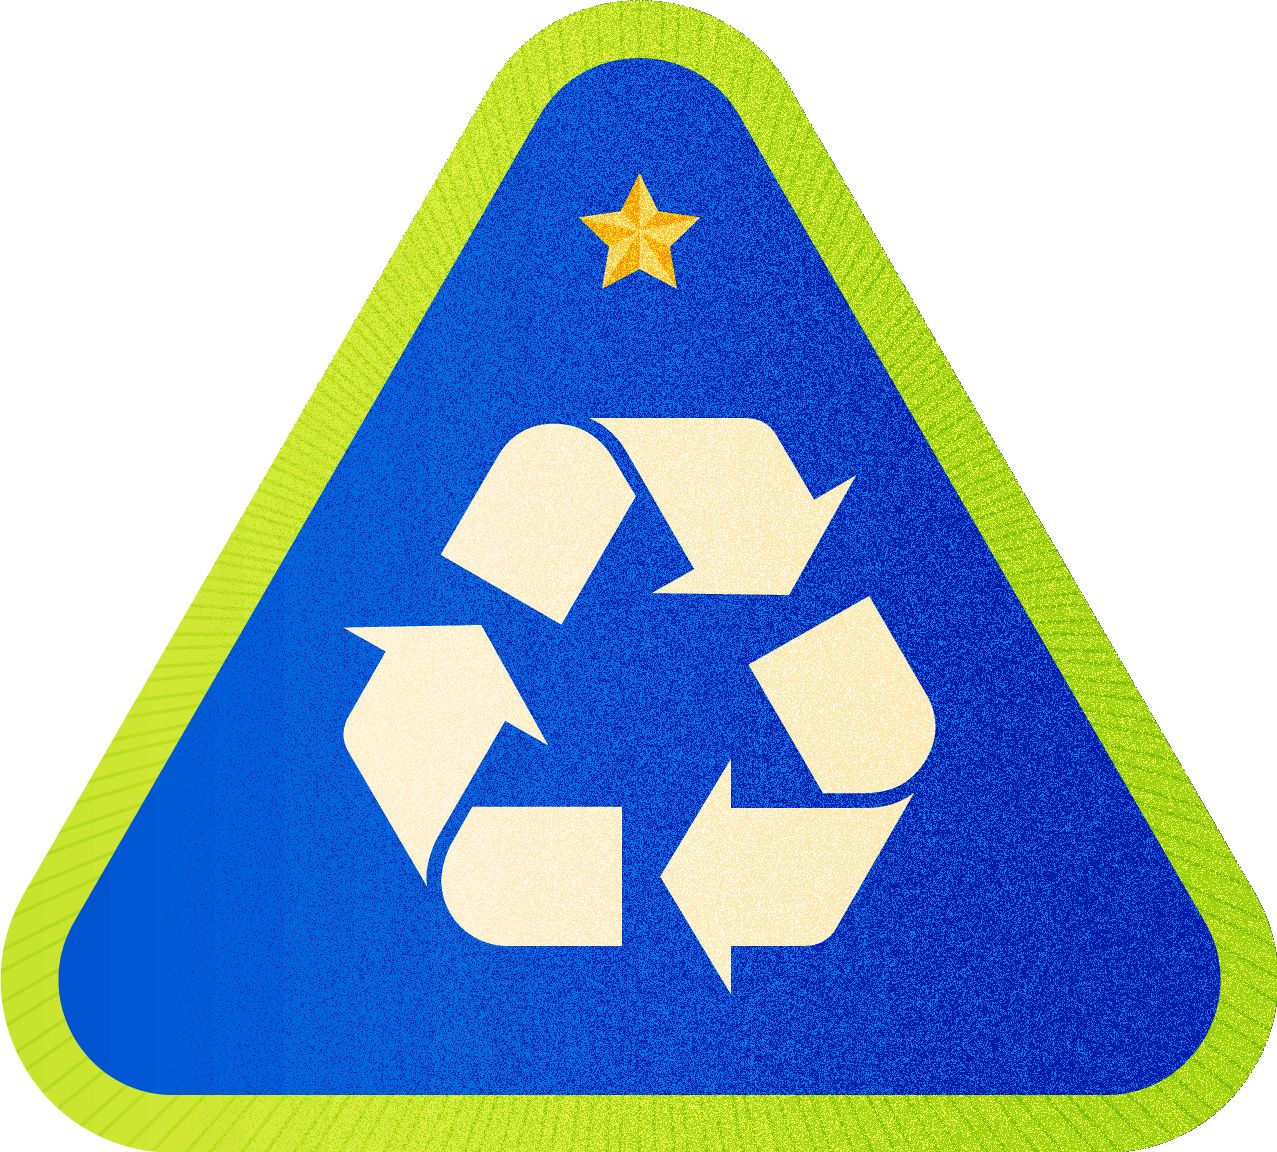 Recycling Renegade: awarded for a perfect score on the Recycling section